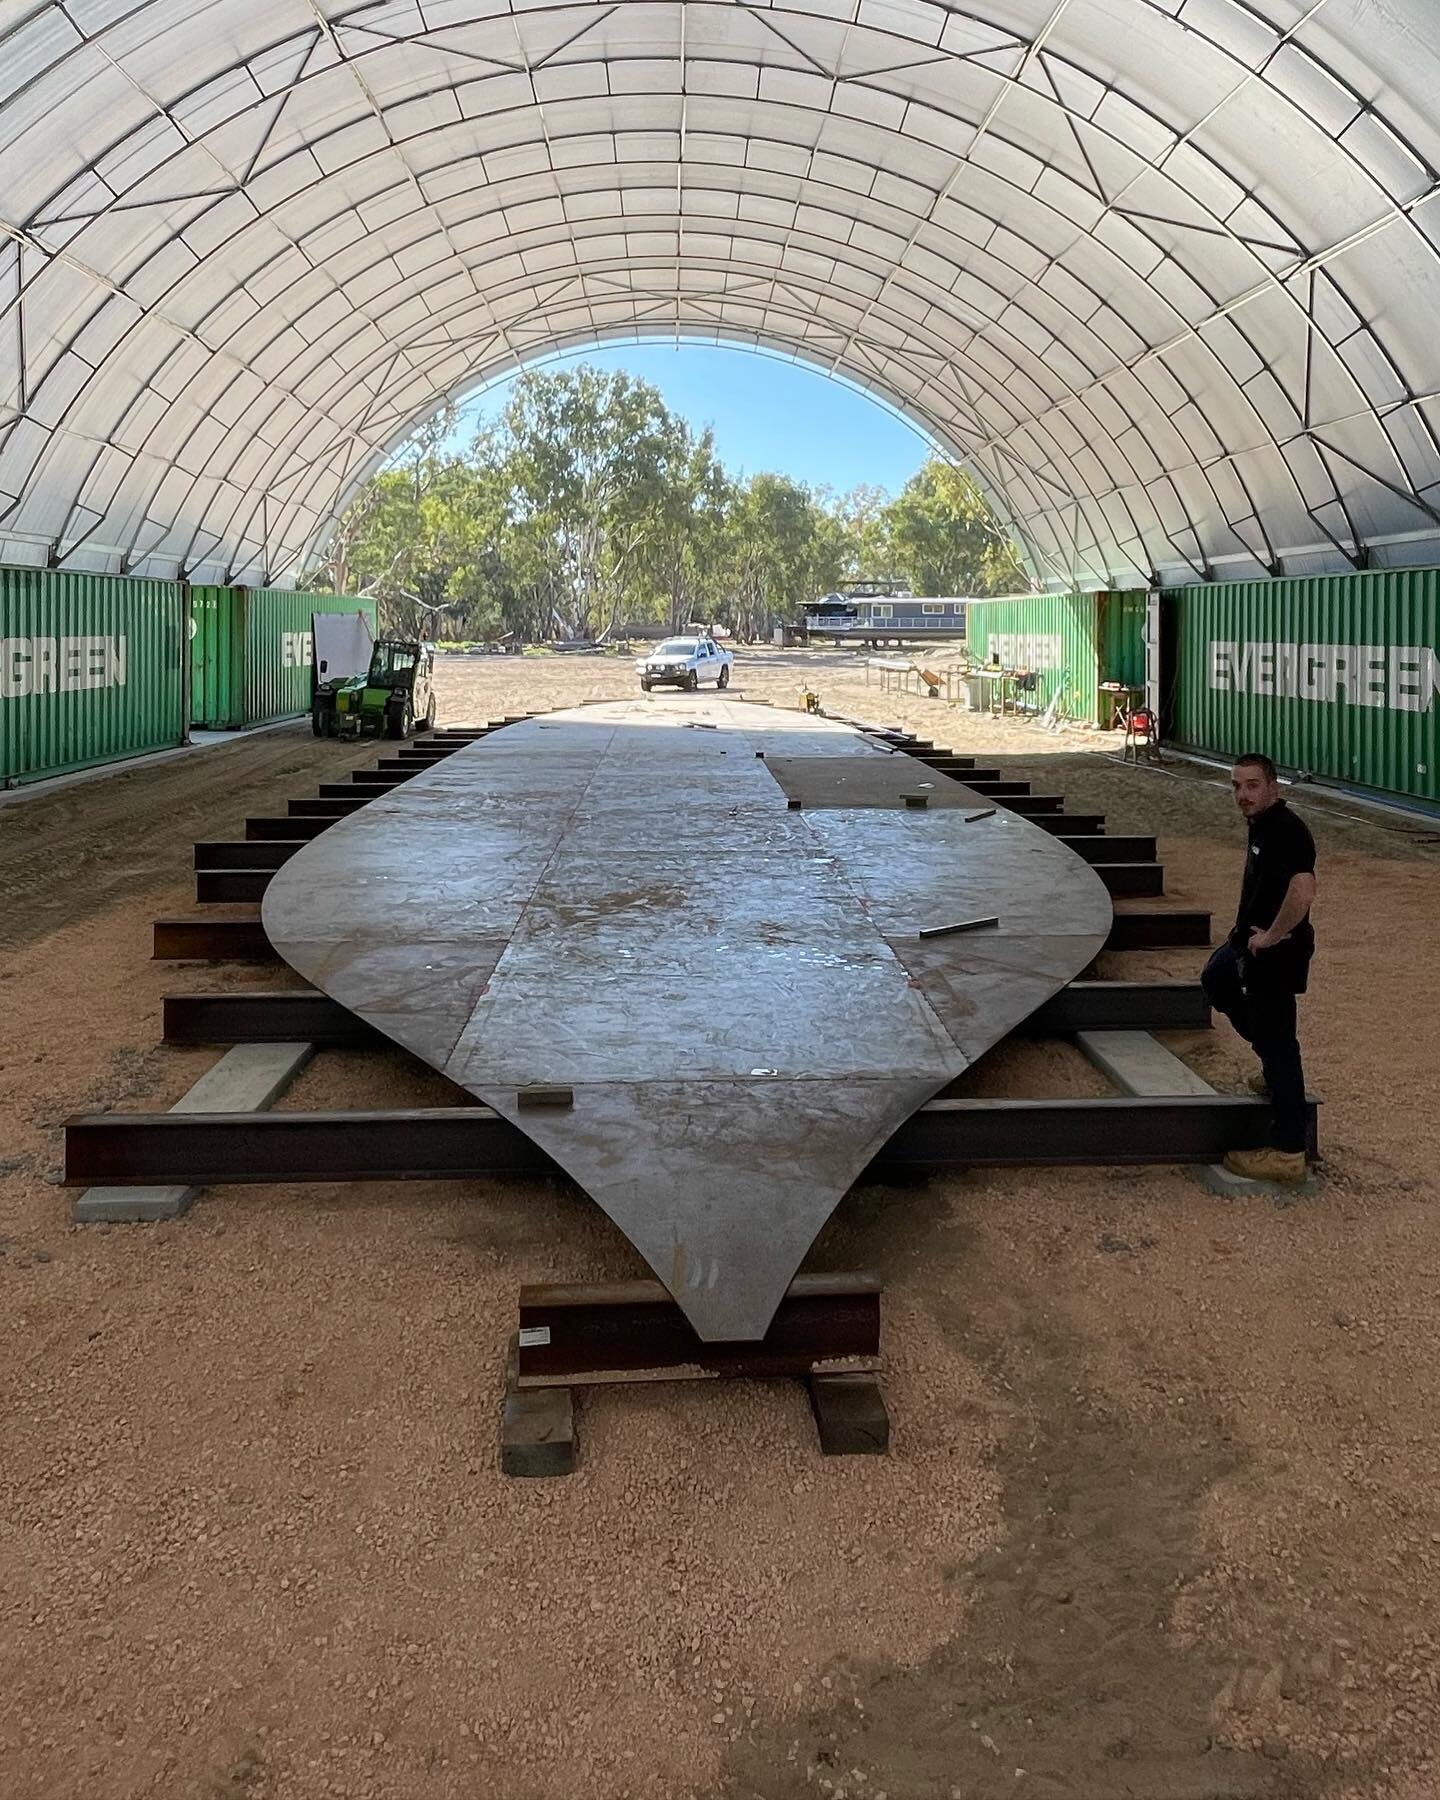 Last Thursday, our team members @samb.erry and @jordanbankc flew out to Mildura to do some survey work with Bruce Hobson in the lead up to their AMSA surveyor accreditation exams.  They also had the chance to touch base about Bruce&rsquo;s progress b